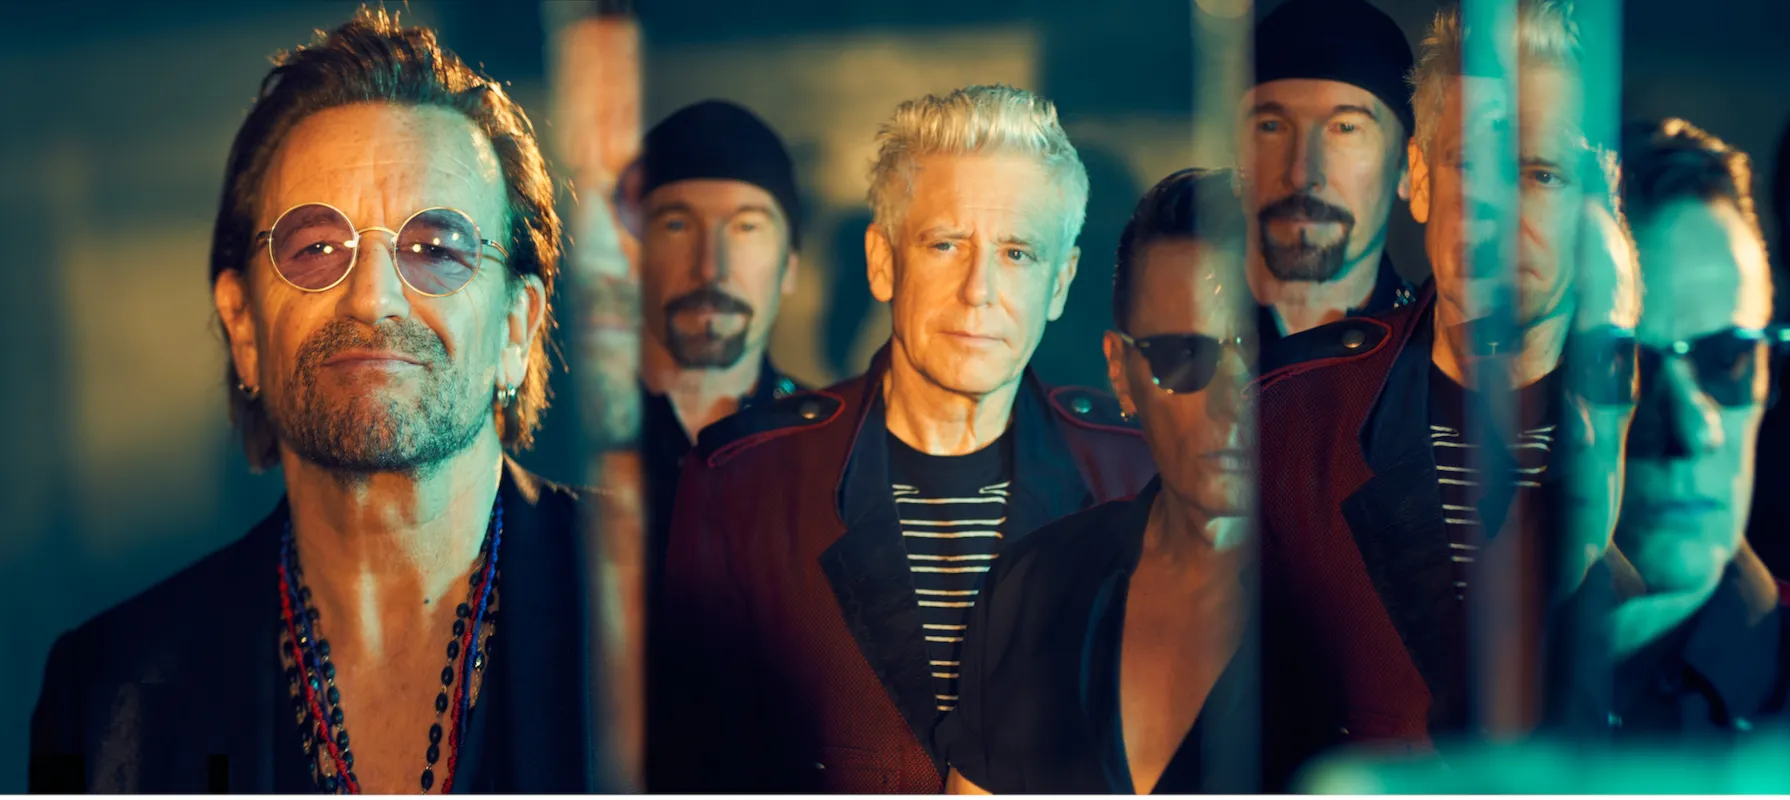 The History and Meaning Behind “One” by U2